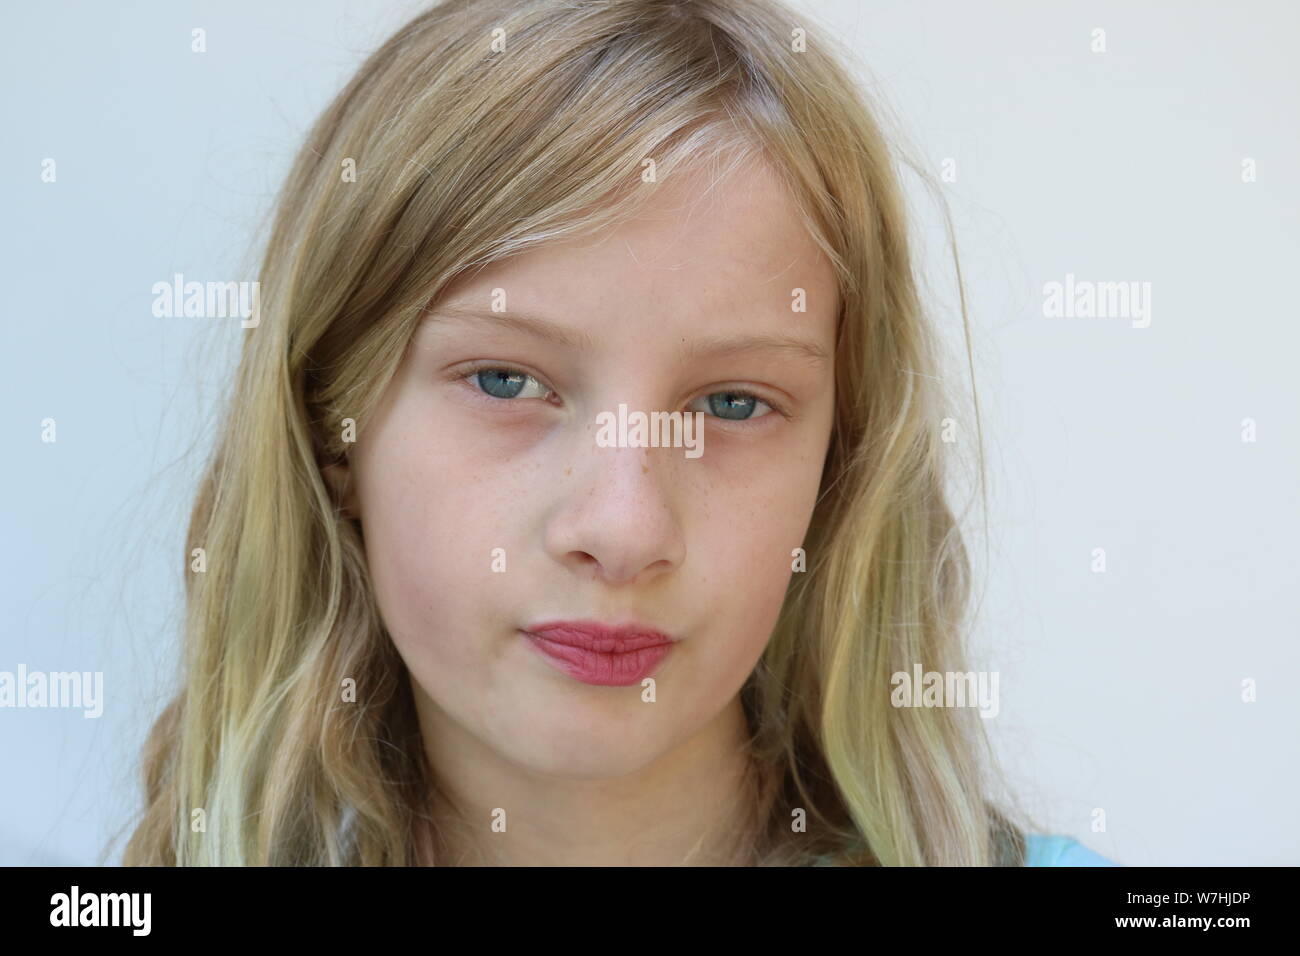 Portrait of a young blonde preteen with pursed lips and a defiant stare Stock Photo